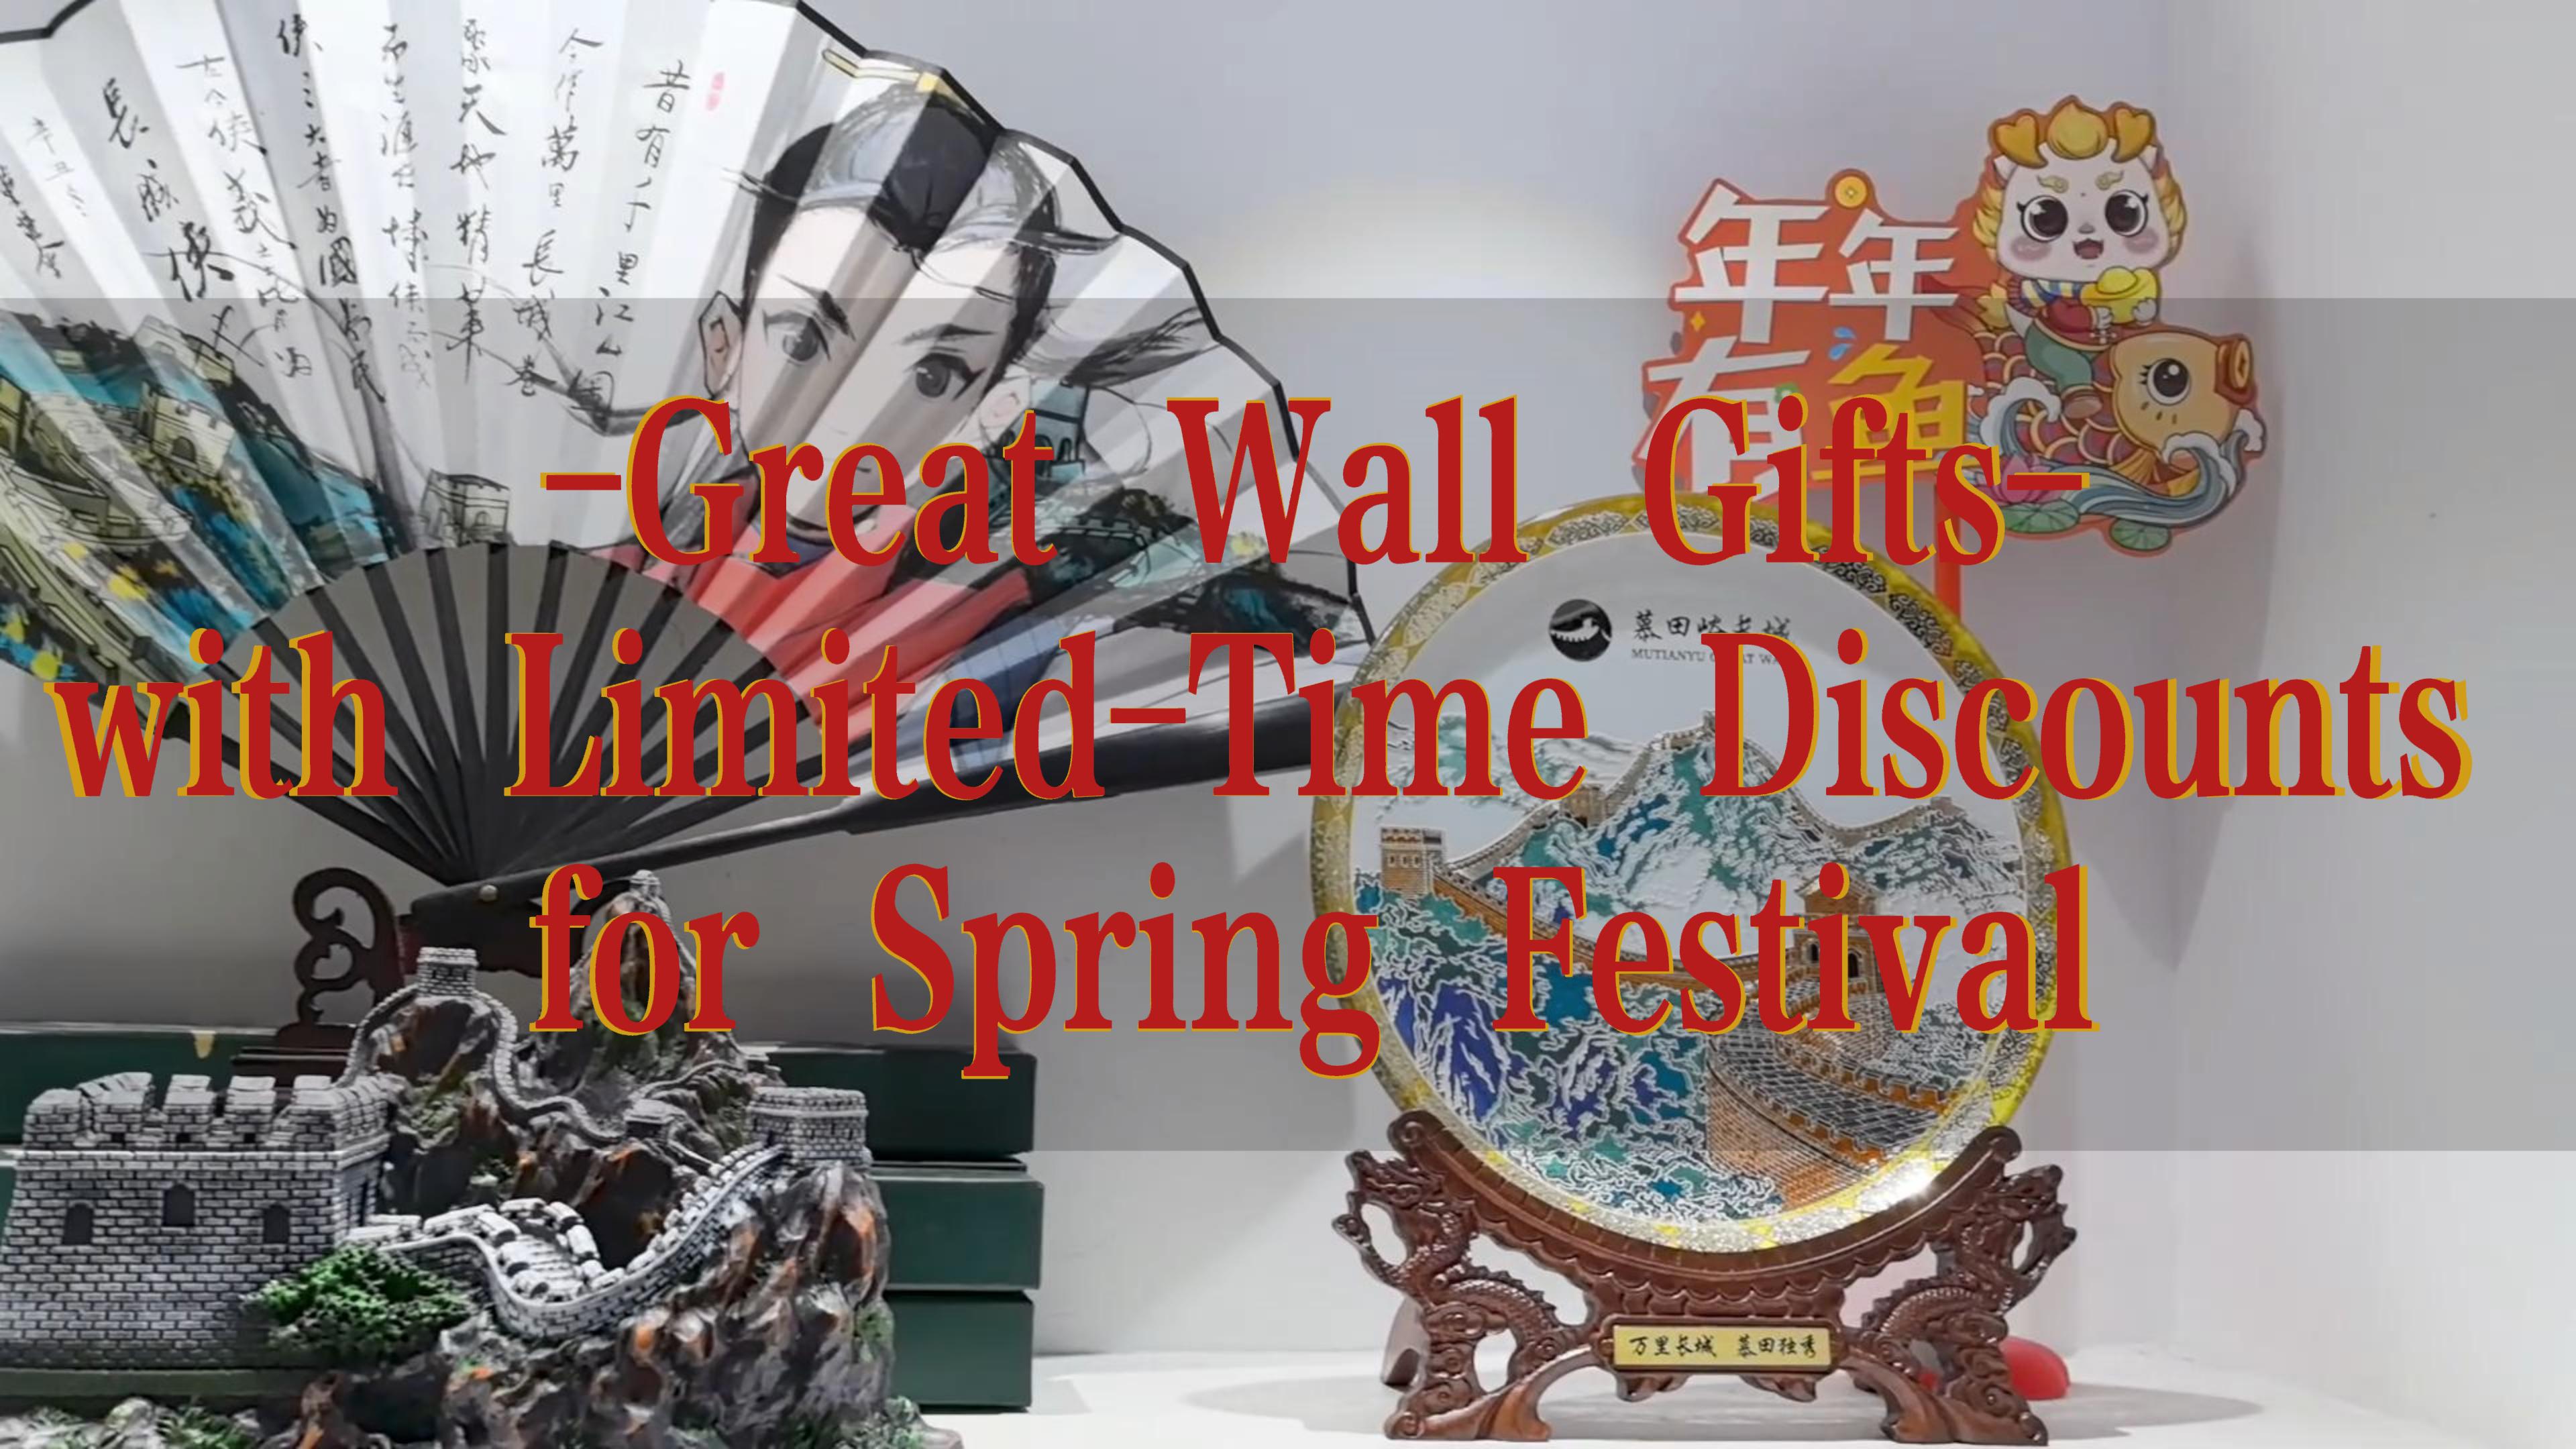 Great Wall Gifts with Limited-Time Discounts for Spring Festival